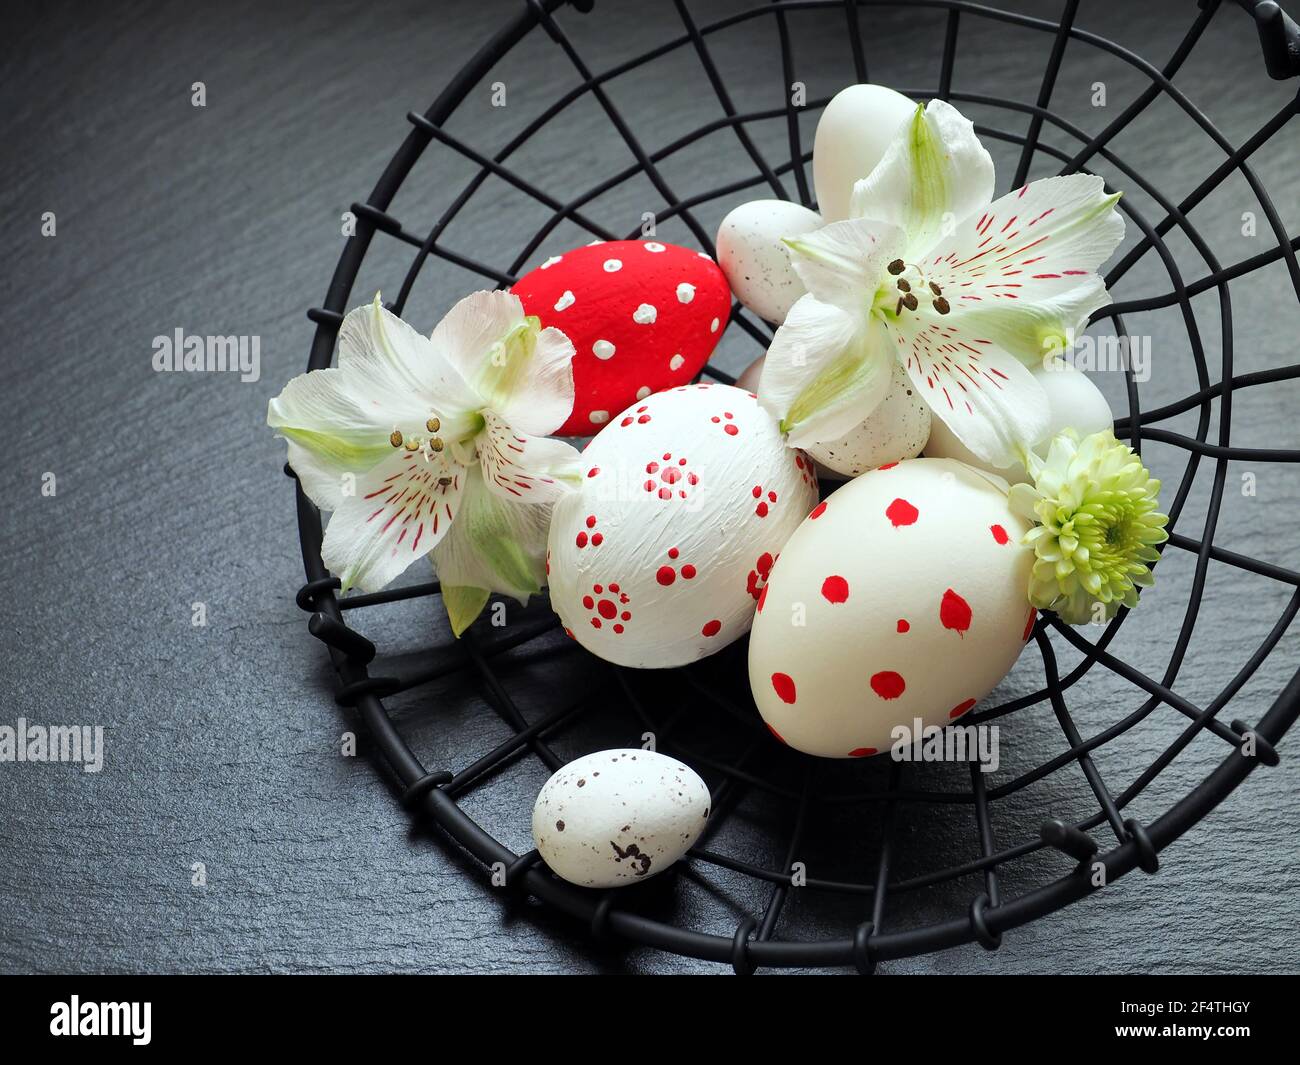 Easter eggs in a metal basket close up over a black stone background Stock Photo